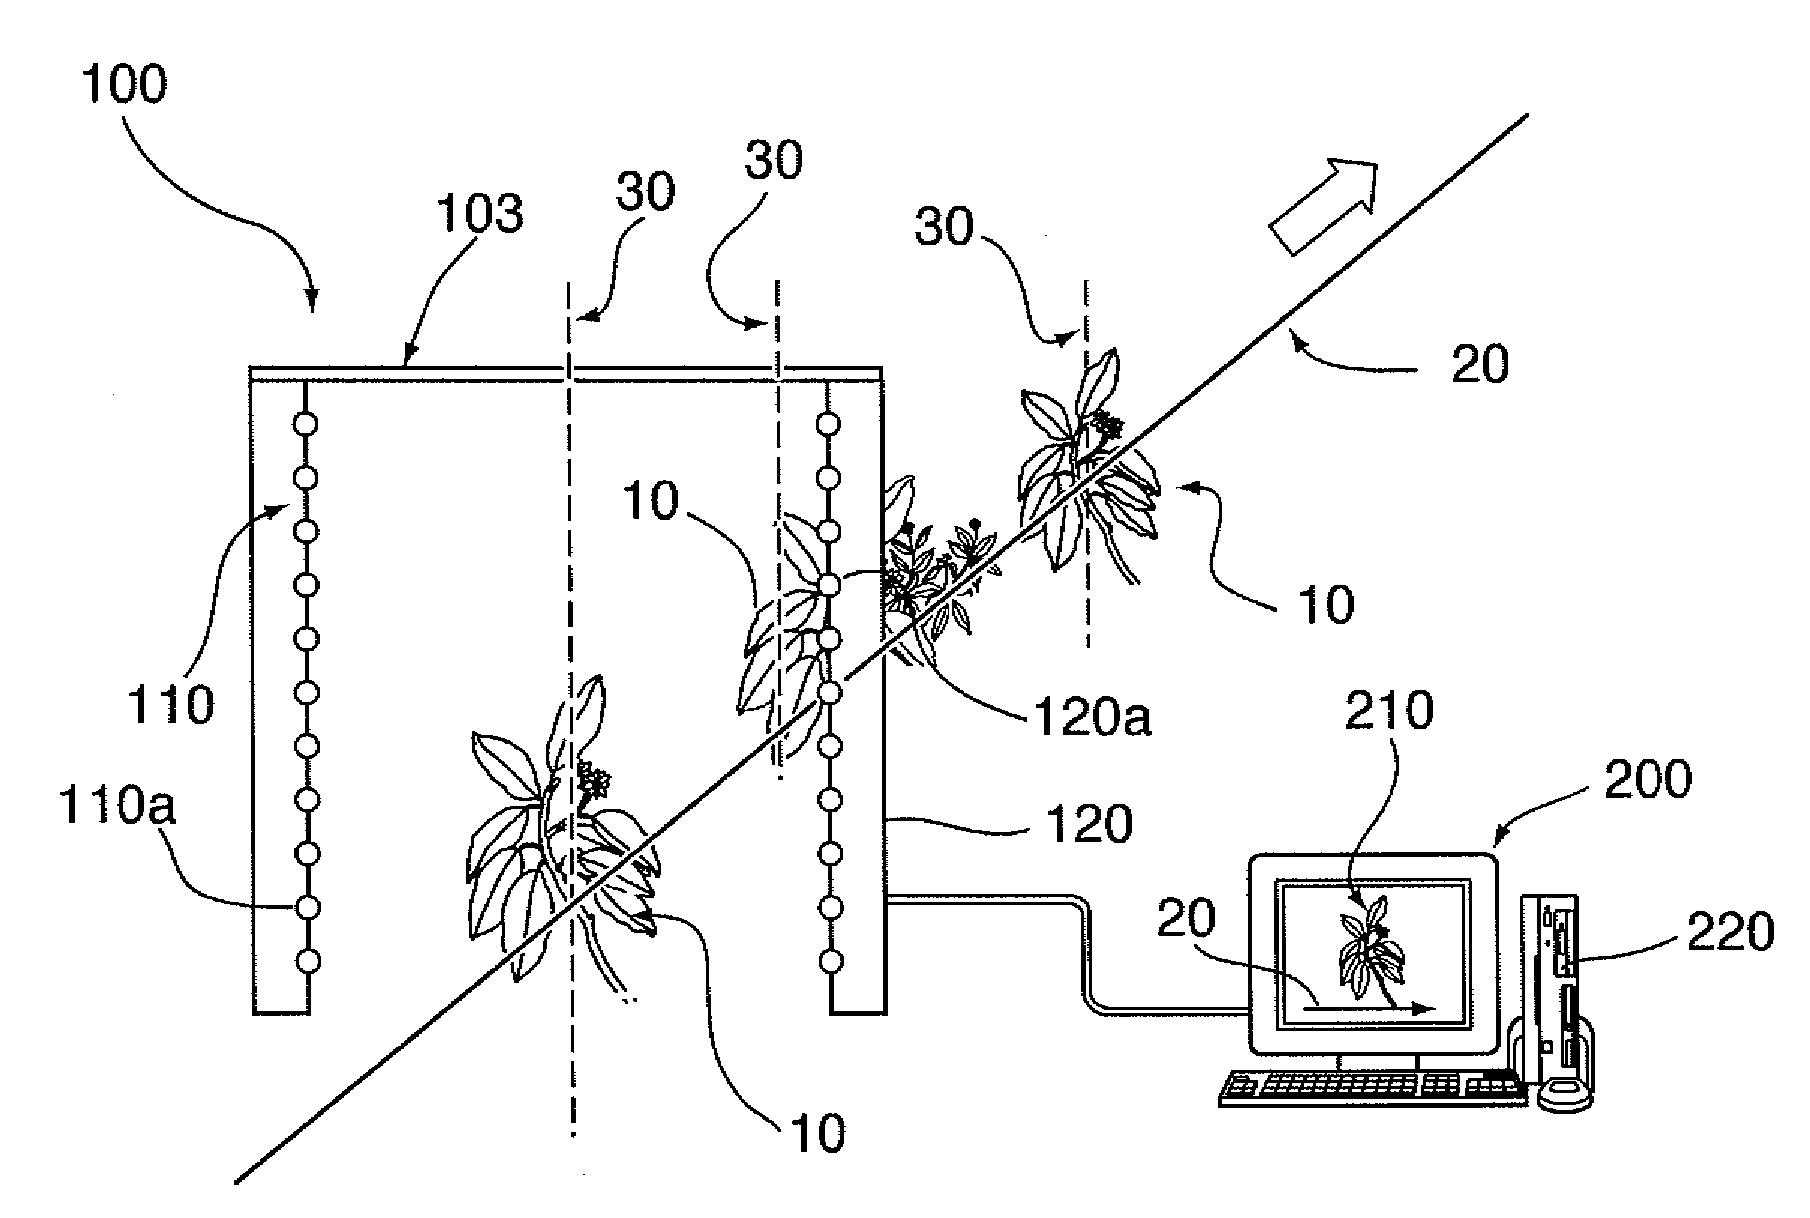 Sensor system, method, and computer program product for plant phenotype measurement in agricultural environments